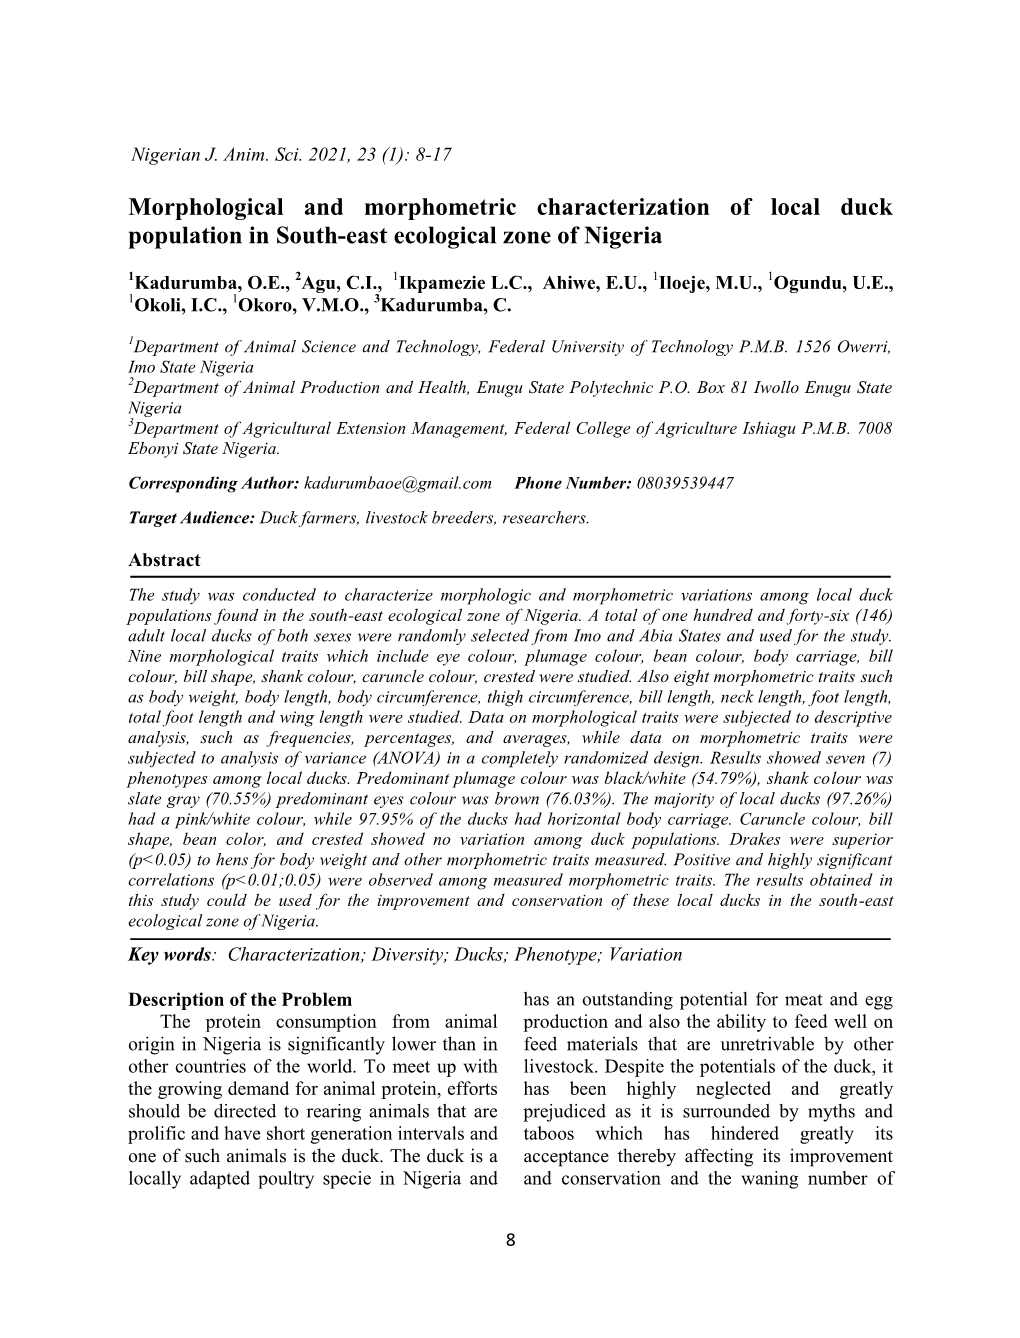 Morphological and Morphometric Characterization of Local Duck Population in South-East Ecological Zone of Nigeria